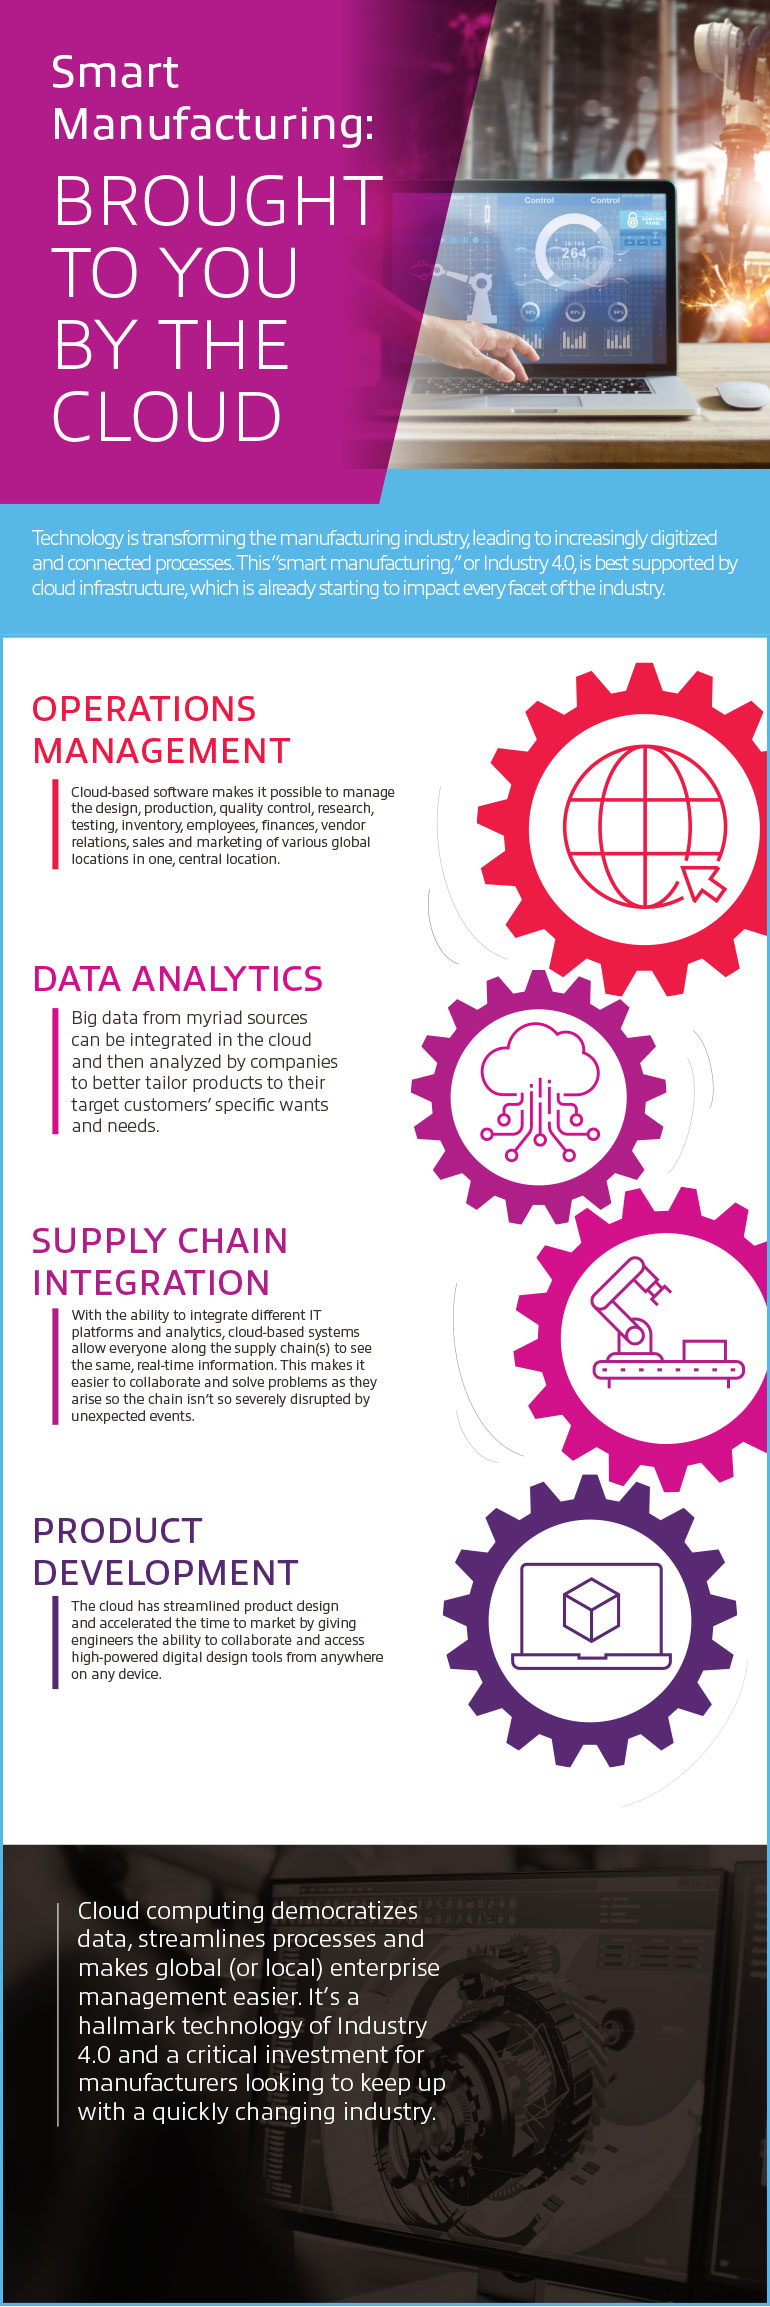 Smart Manufacturing: Brought to You by the Cloud infographic